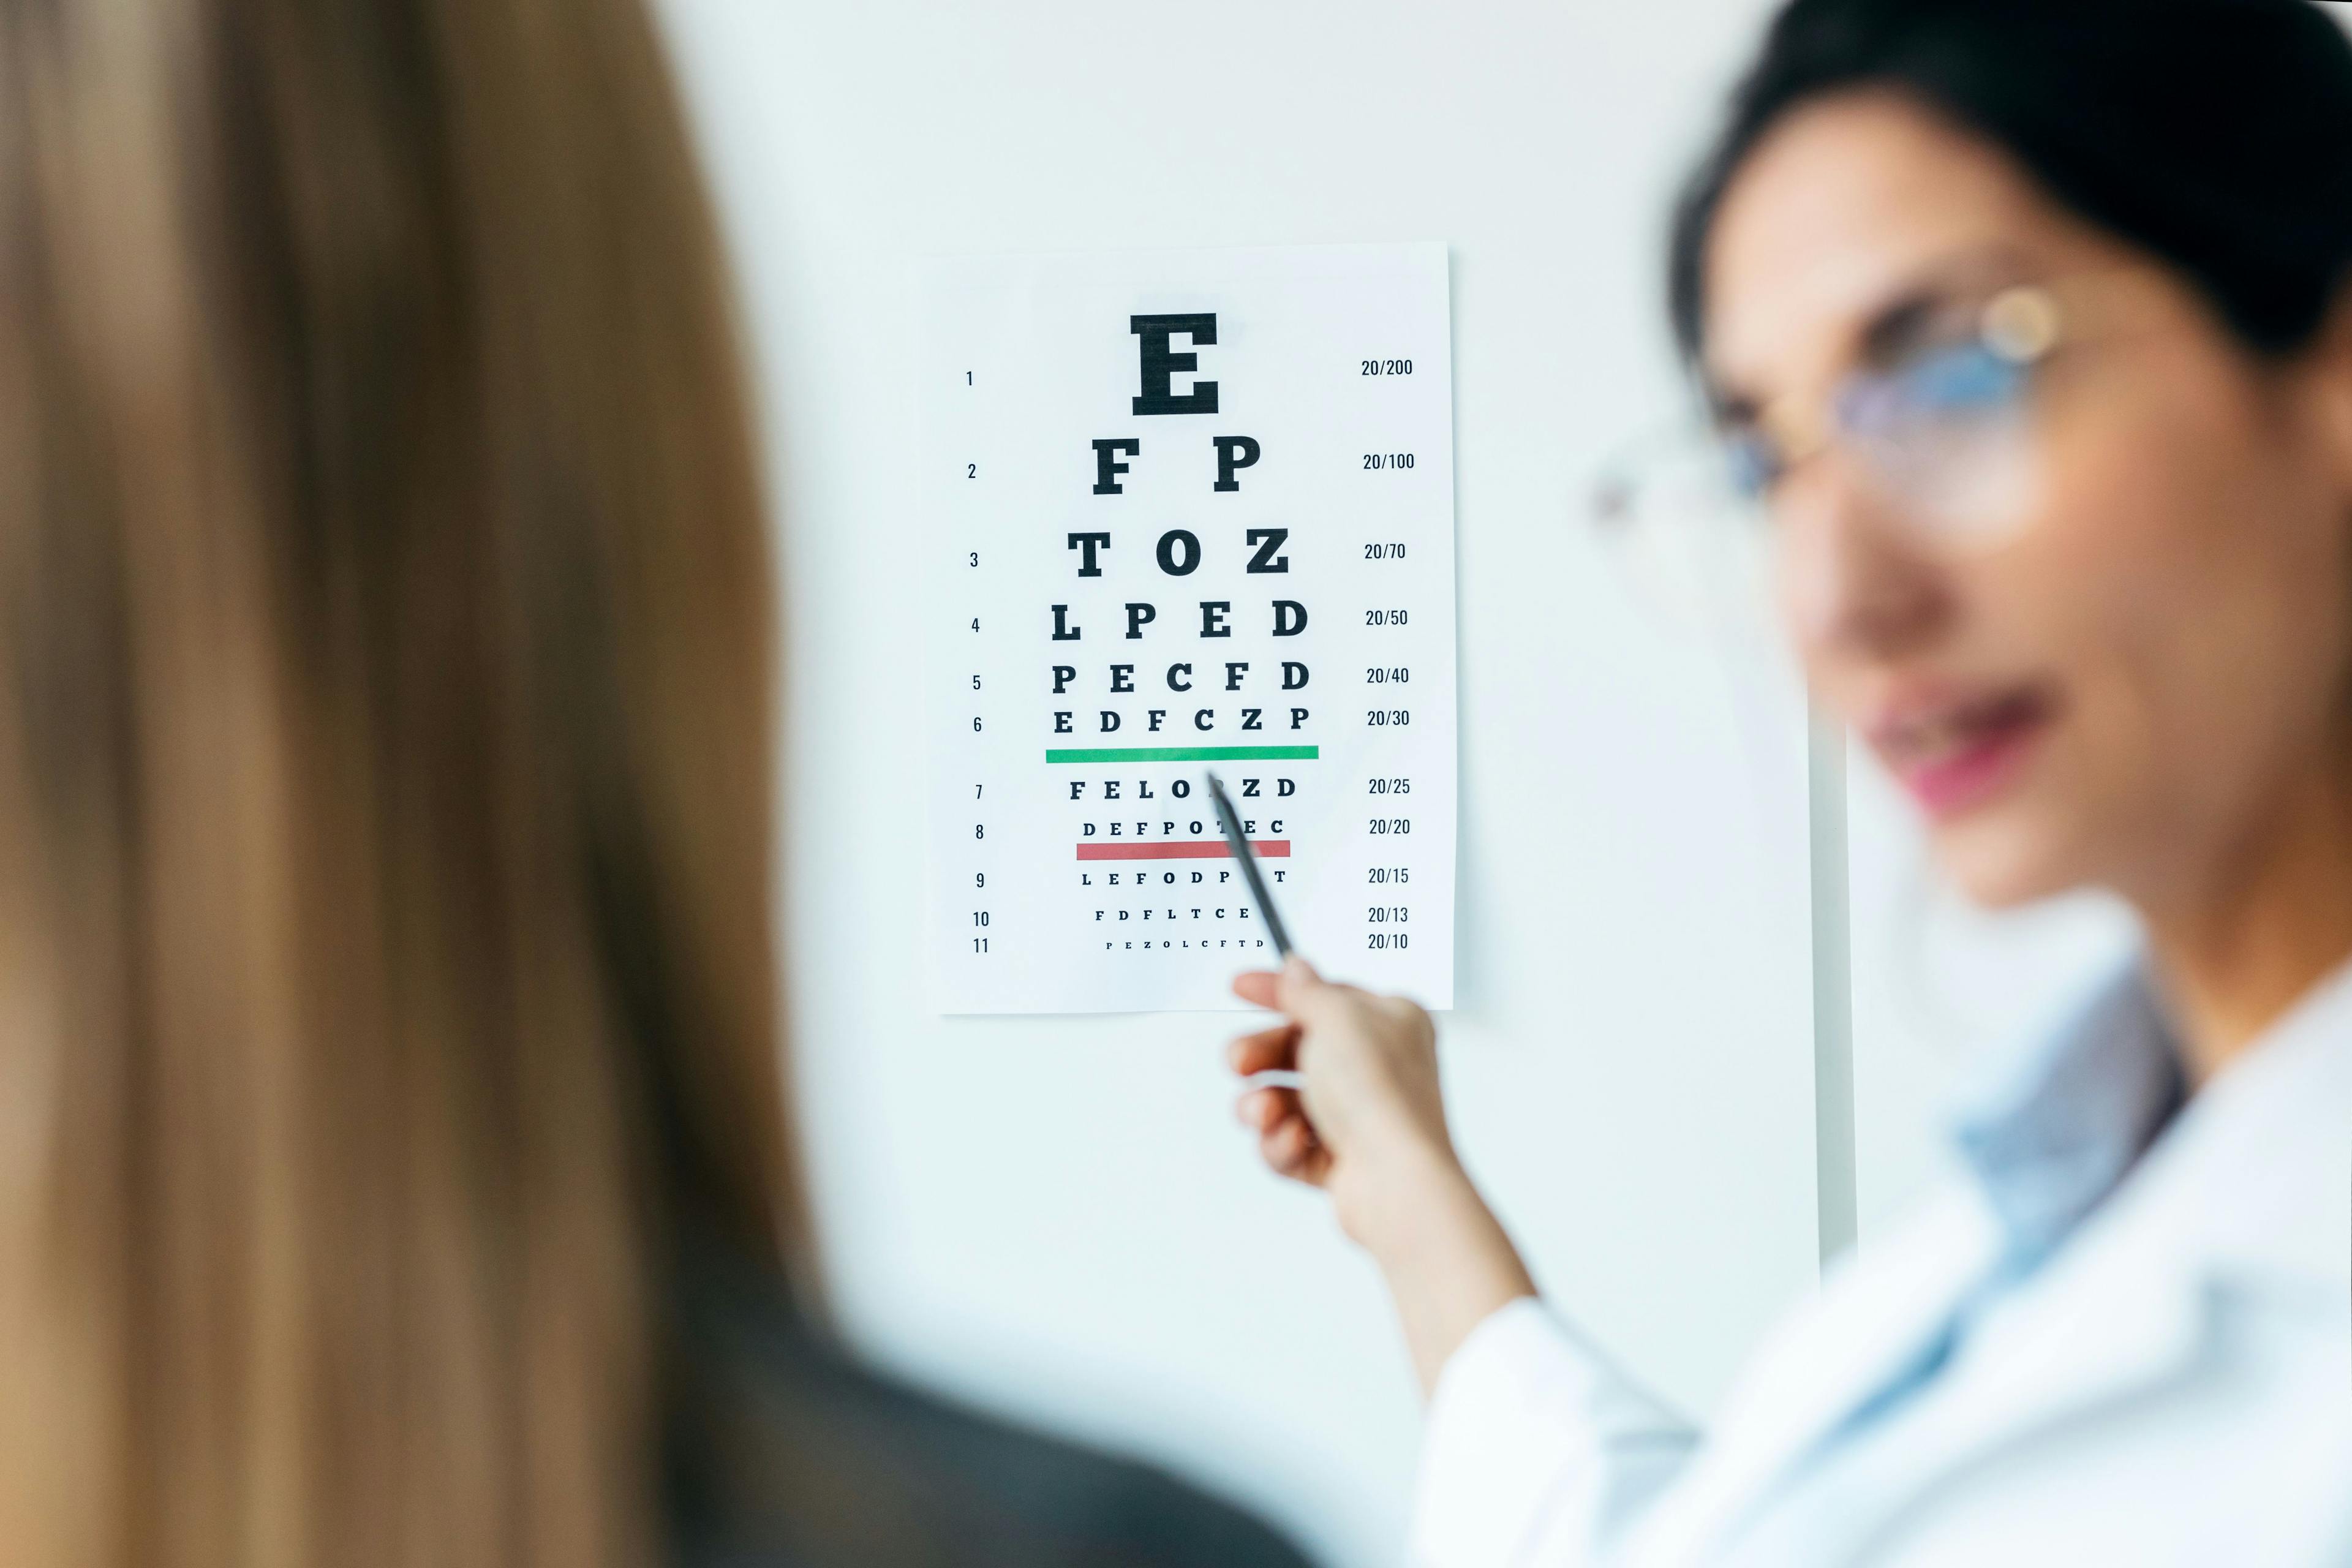 Expanded School-Based Vision Testing May Help Address Disparities, Study Says